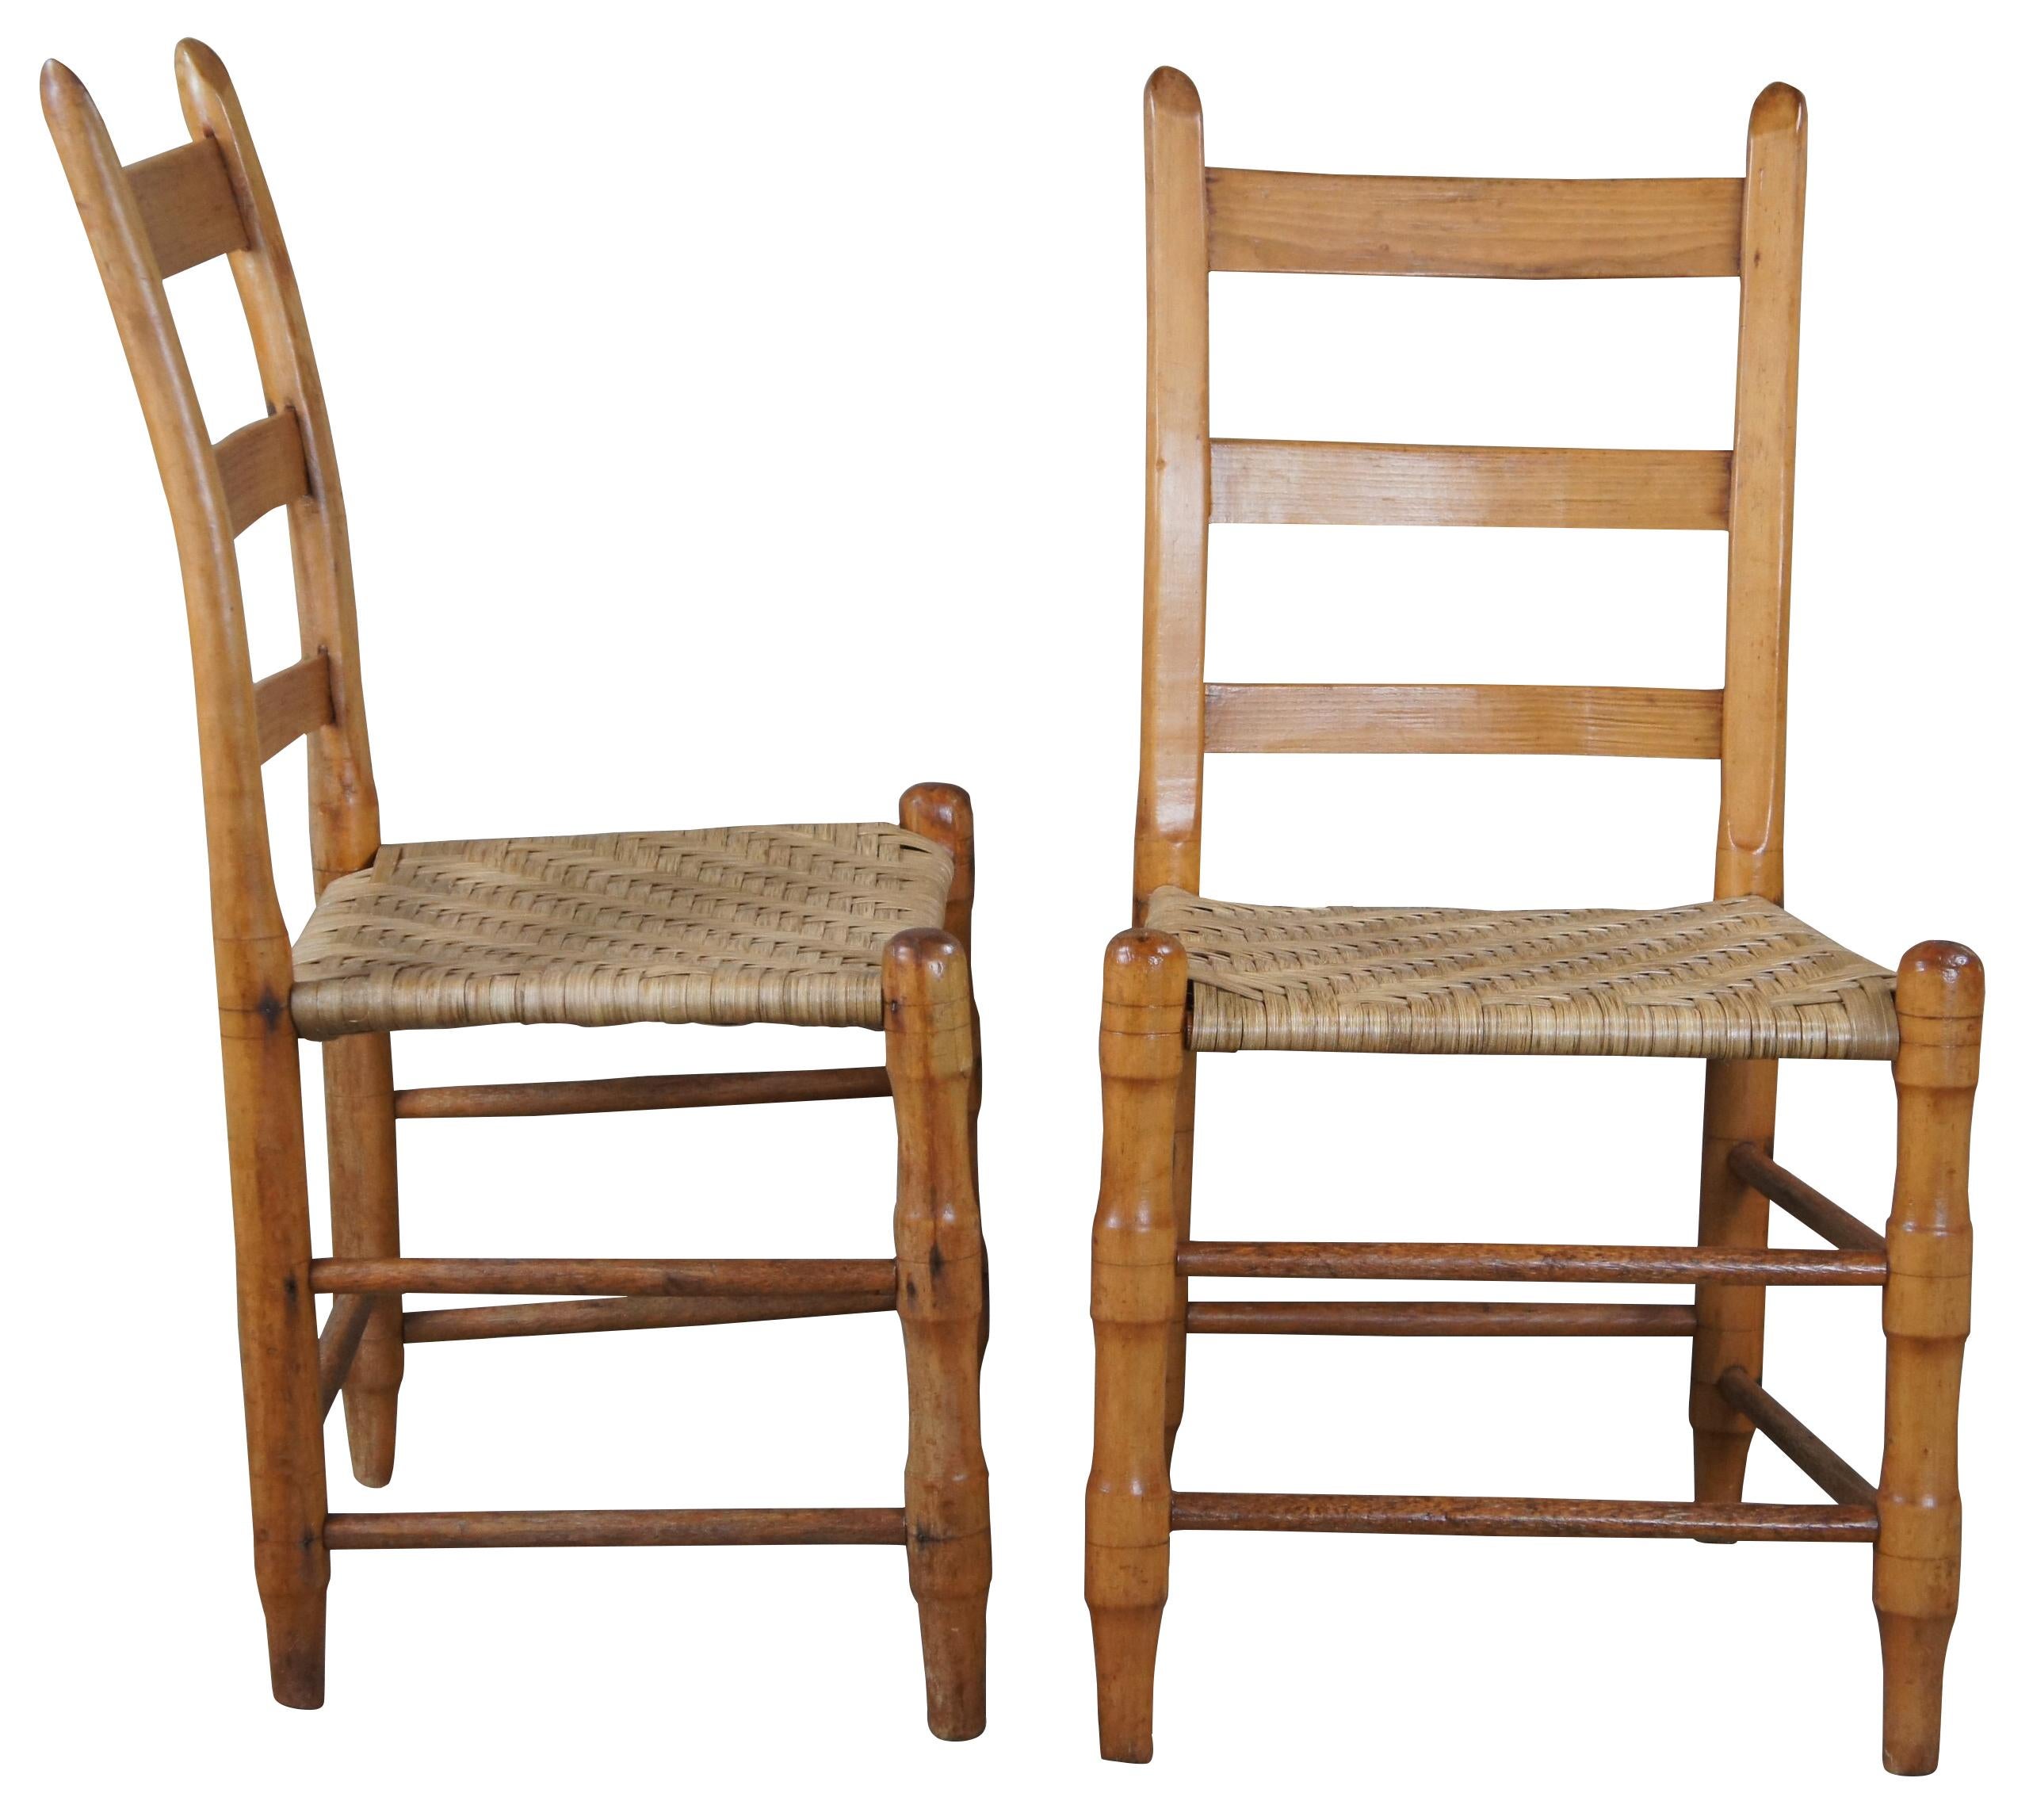 Vintage American Shaker maple and pine rush seat ladderback farmhouse dining chairs.

18.5